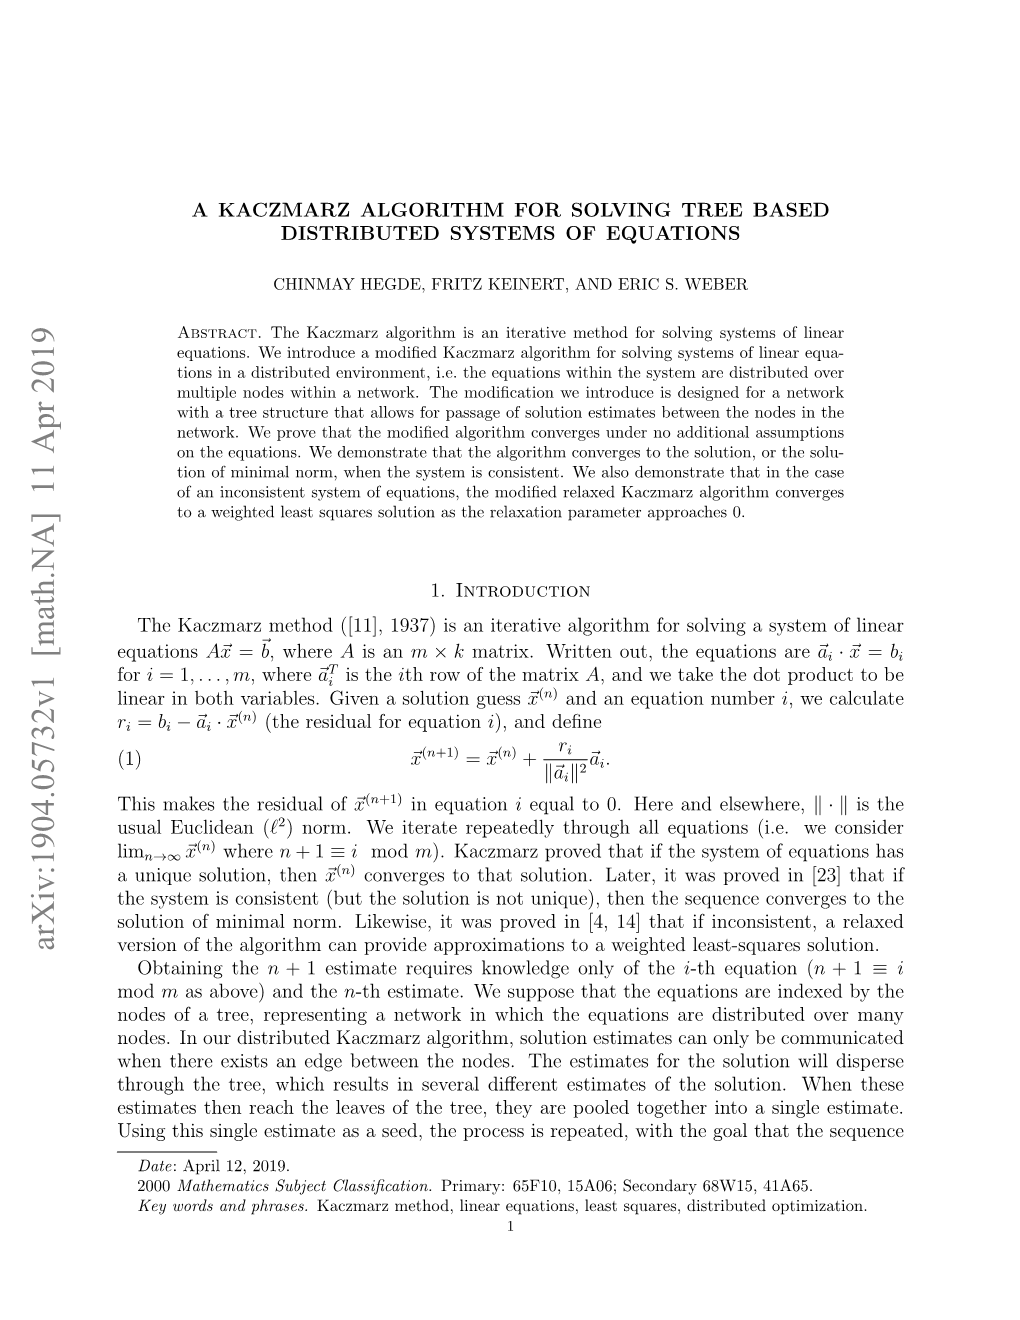 Arxiv:1904.05732V1 [Math.NA] 11 Apr 2019 Version of the Algorithm Can Provide Approximations to a Weighted Least-Squares Solution